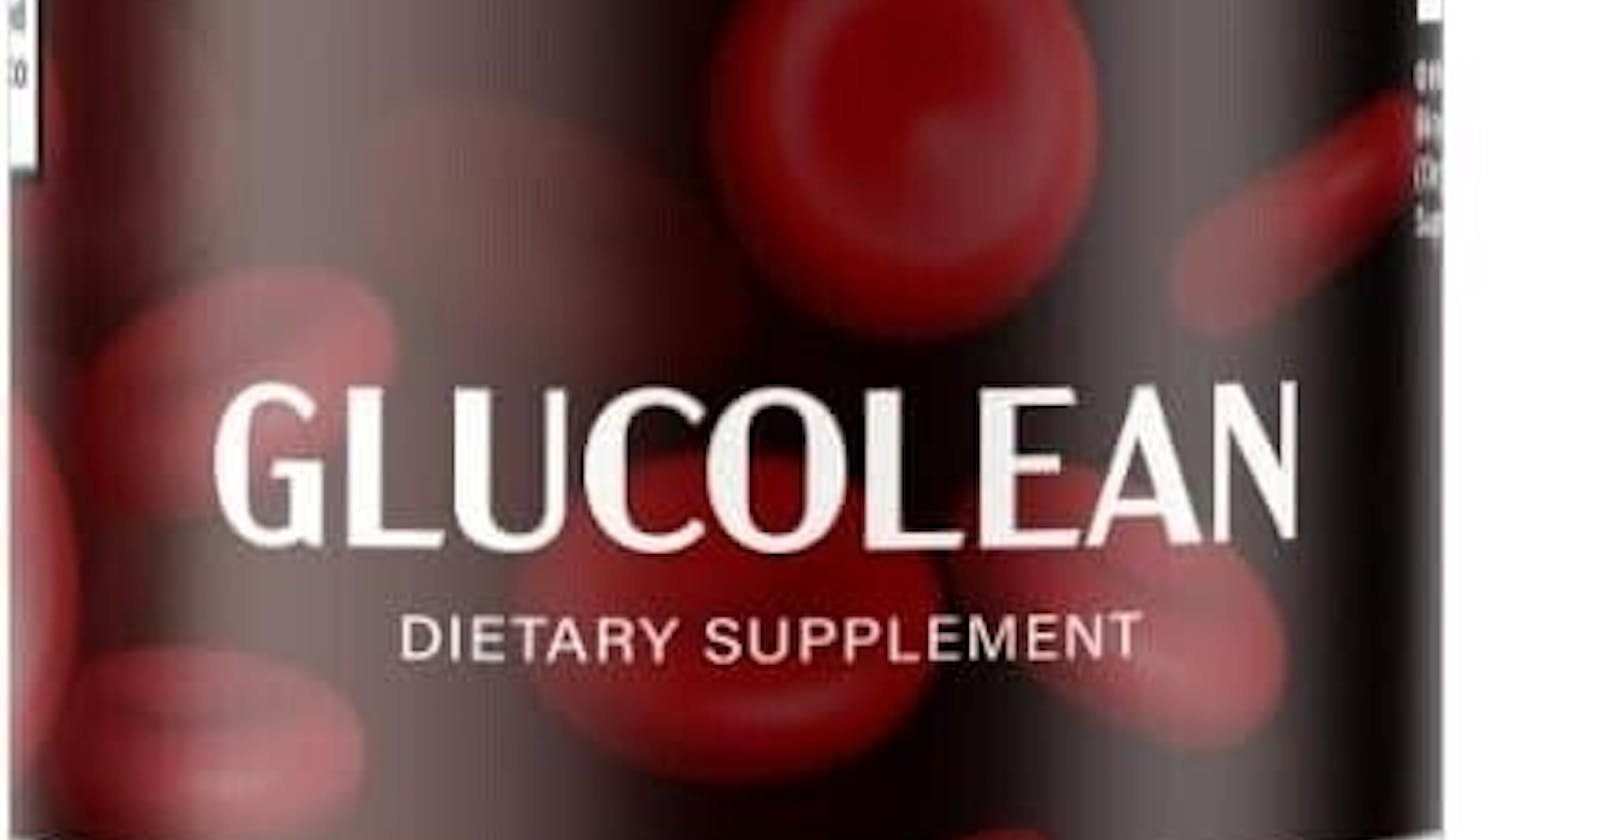 Glucolean Review – Does This Product Really Work?